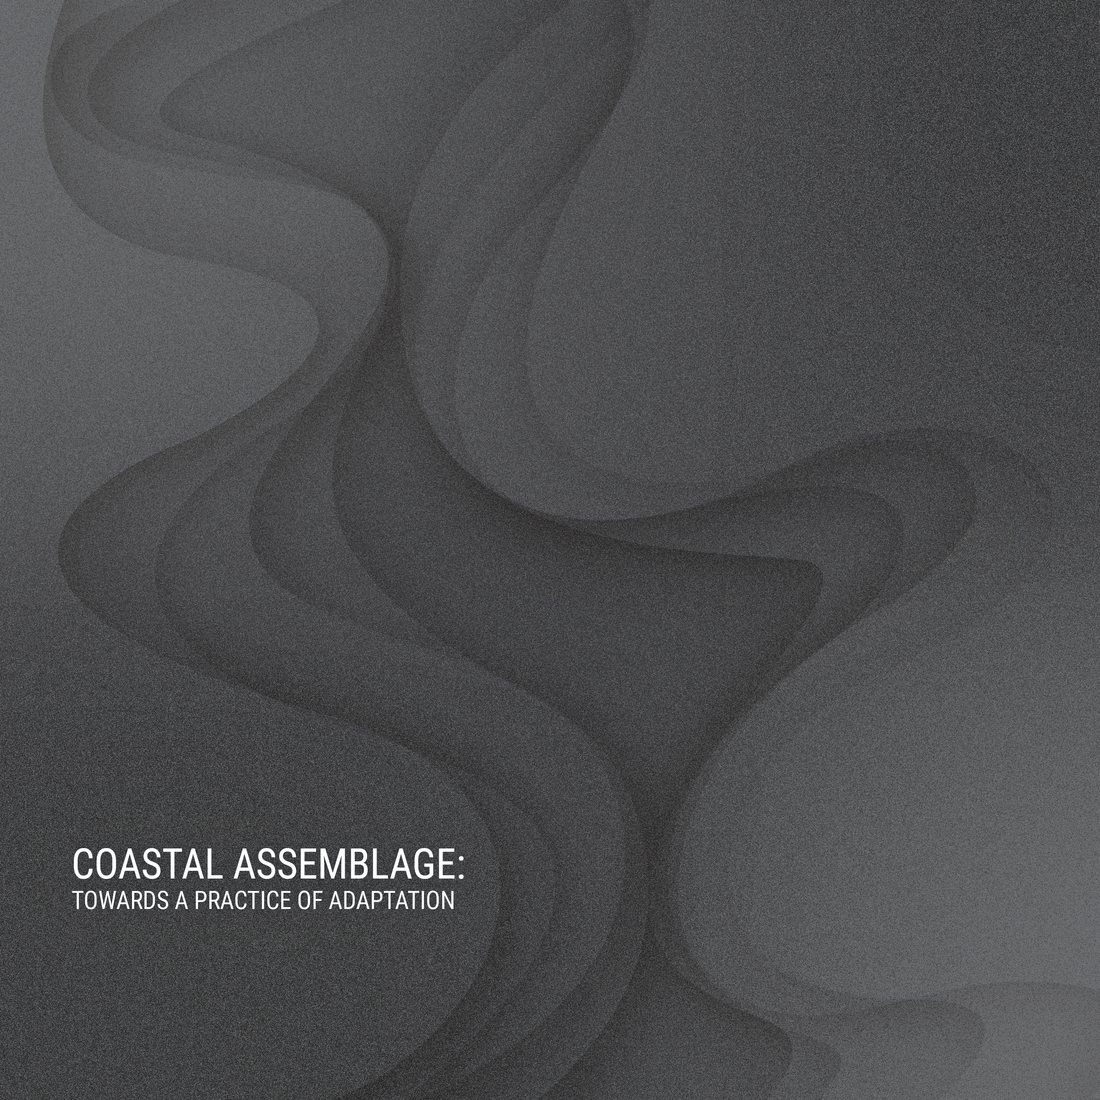 COASTAL ASSEMBLAGE: TOWARDS A PRACTICE OF ADAPTATION